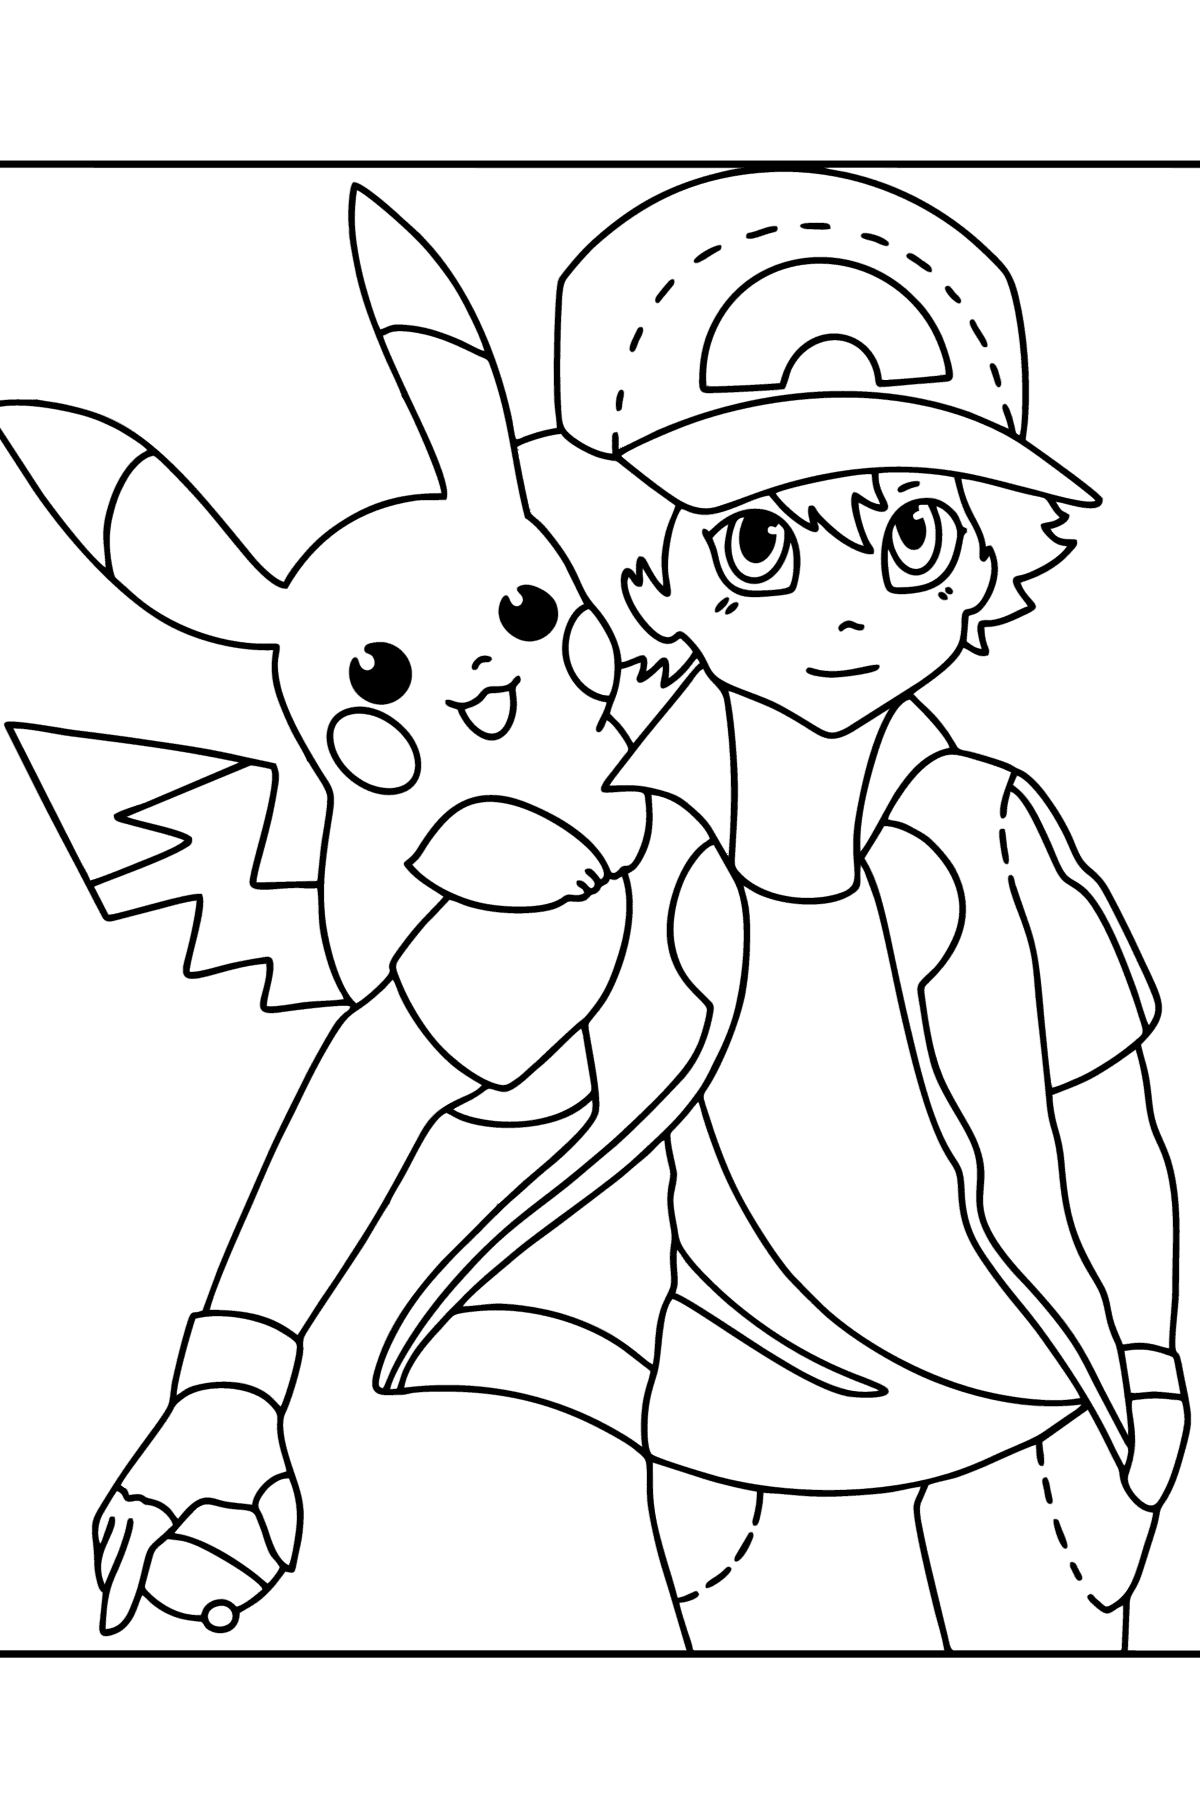 Colouring page Pokémon X and Y Ash Ketchum - Coloring Pages for Kids